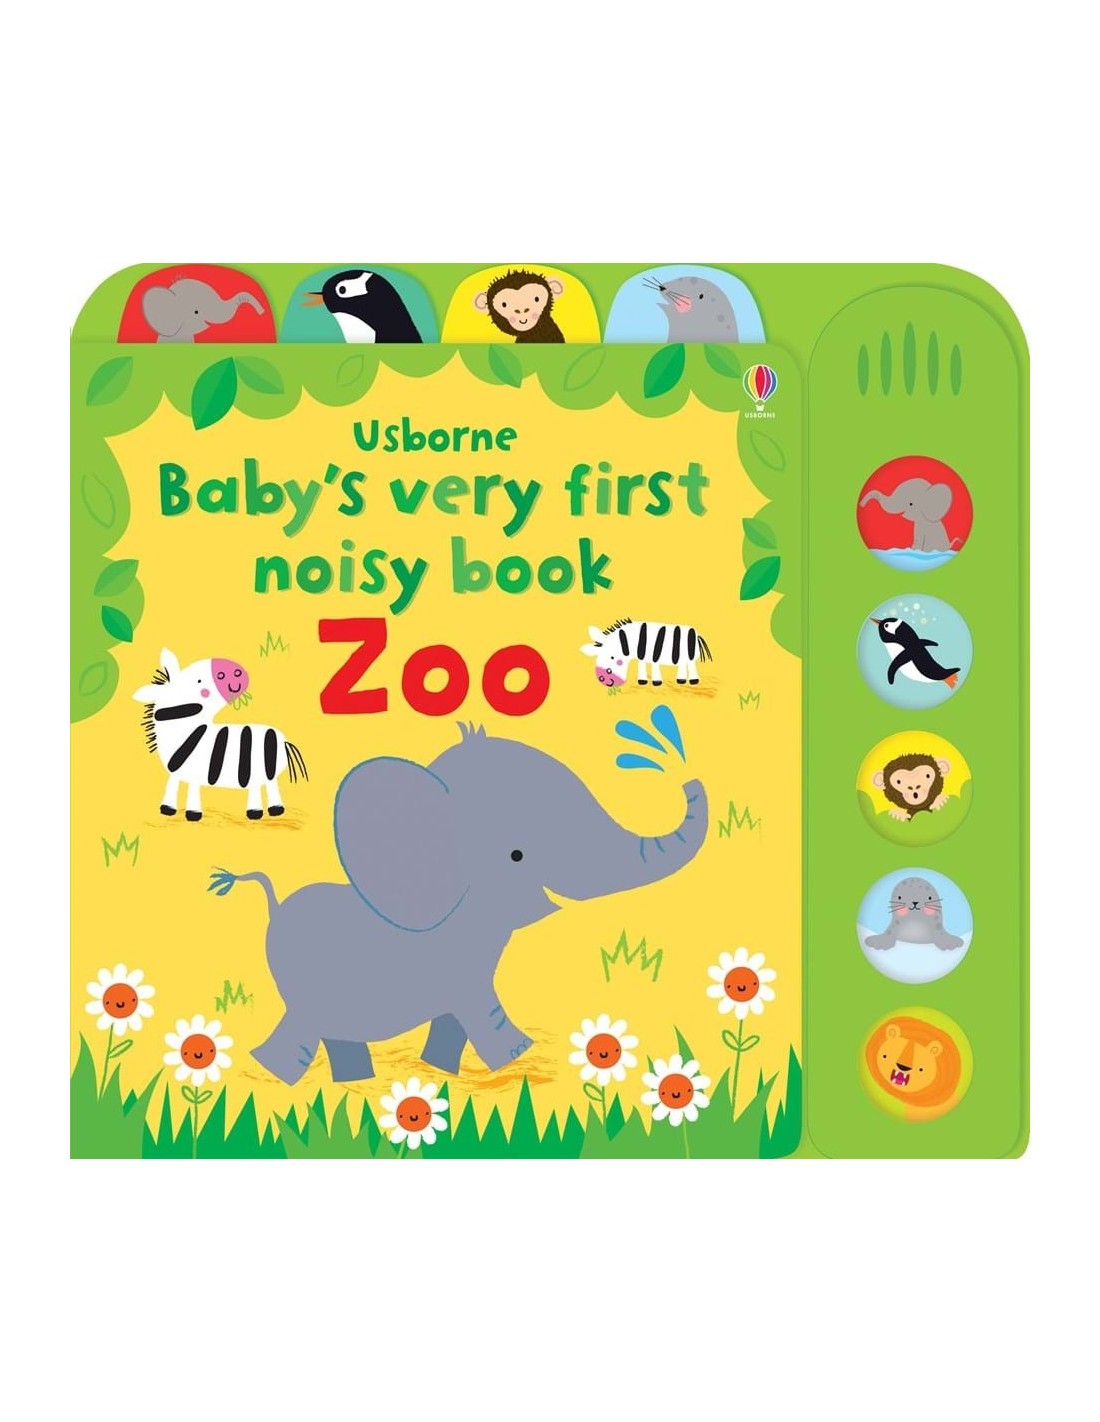 Baby's very first noisy book zoo